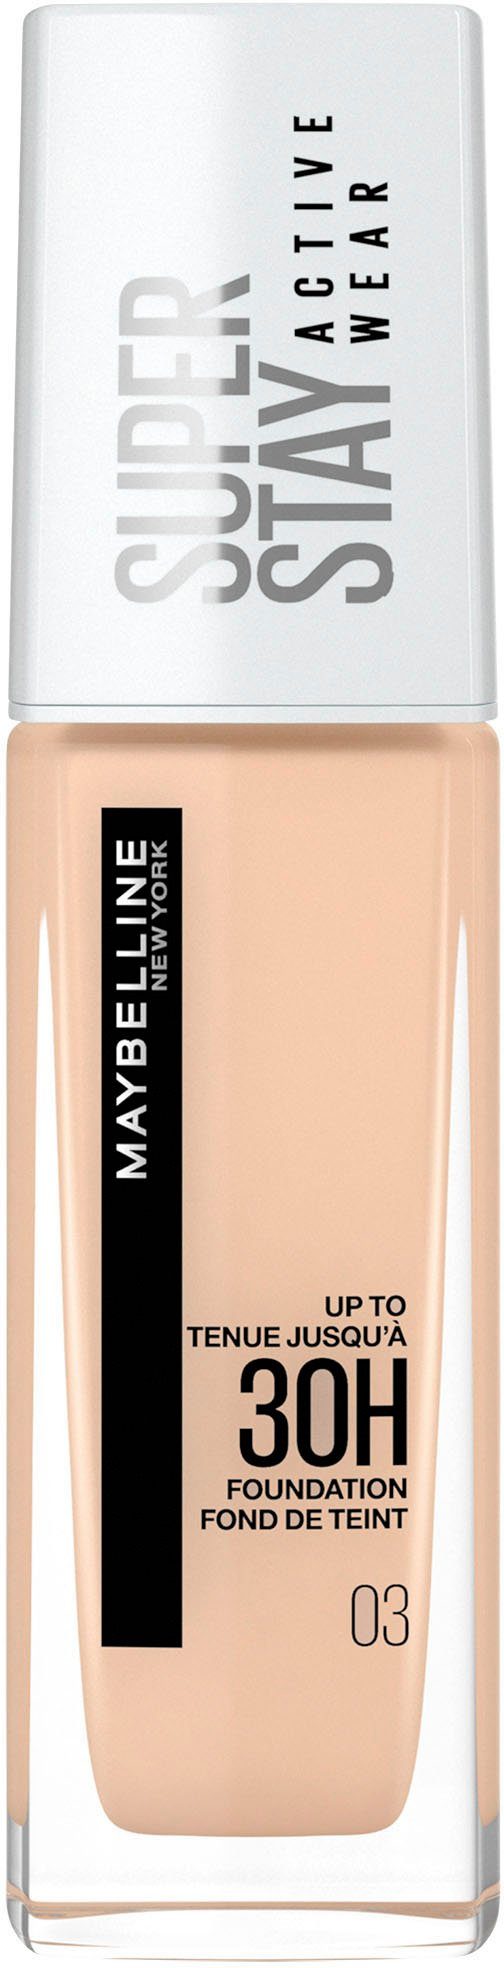 3 Ivory Stay NEW Wear YORK MAYBELLINE True Foundation Super Active